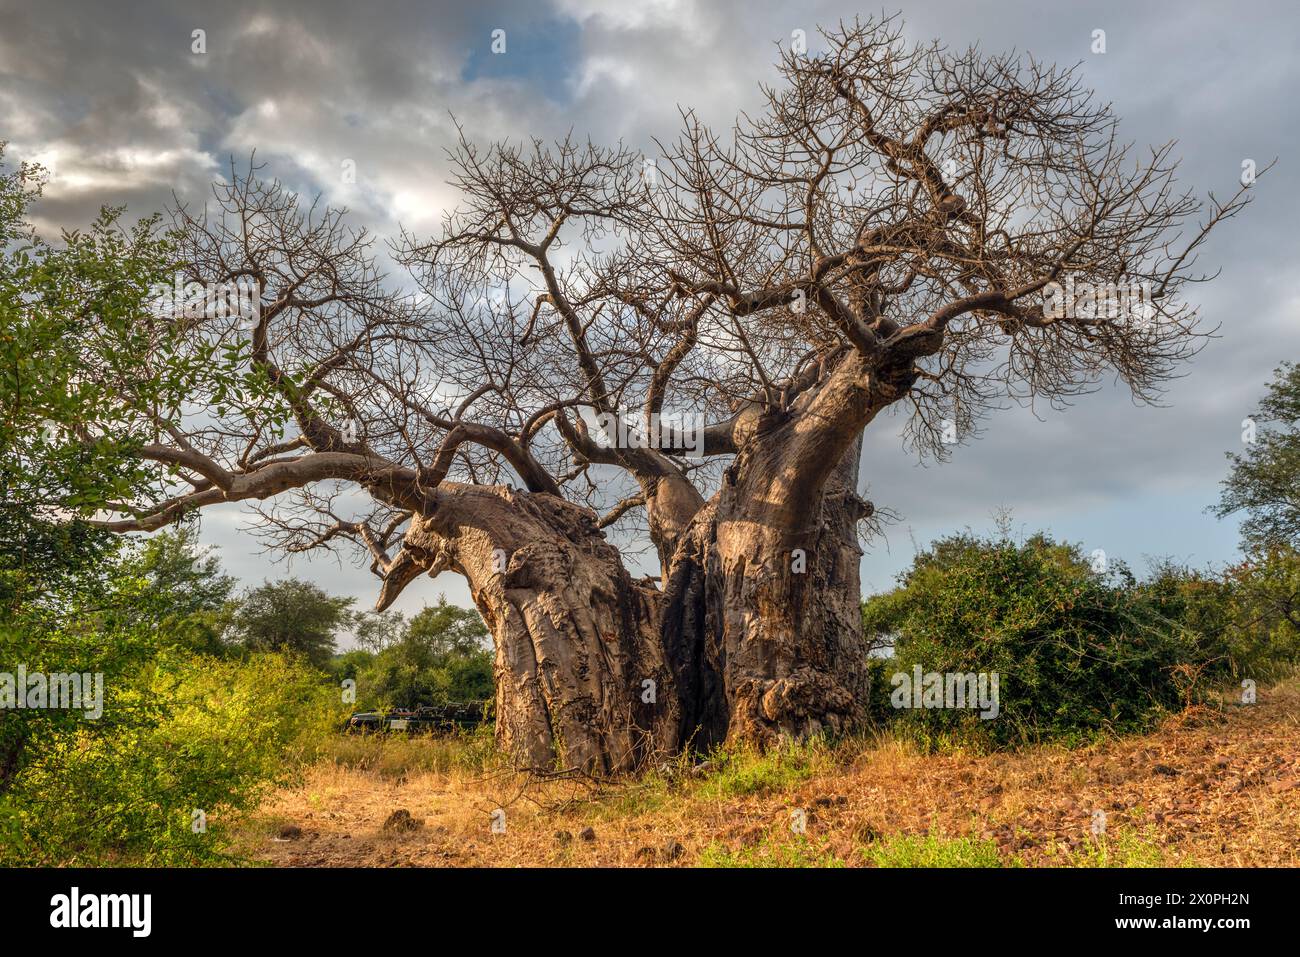 Very large Baobab Tree in The Makuleke Contract park of Northern Kruger, Limpopo Region, South Africa Stock Photo